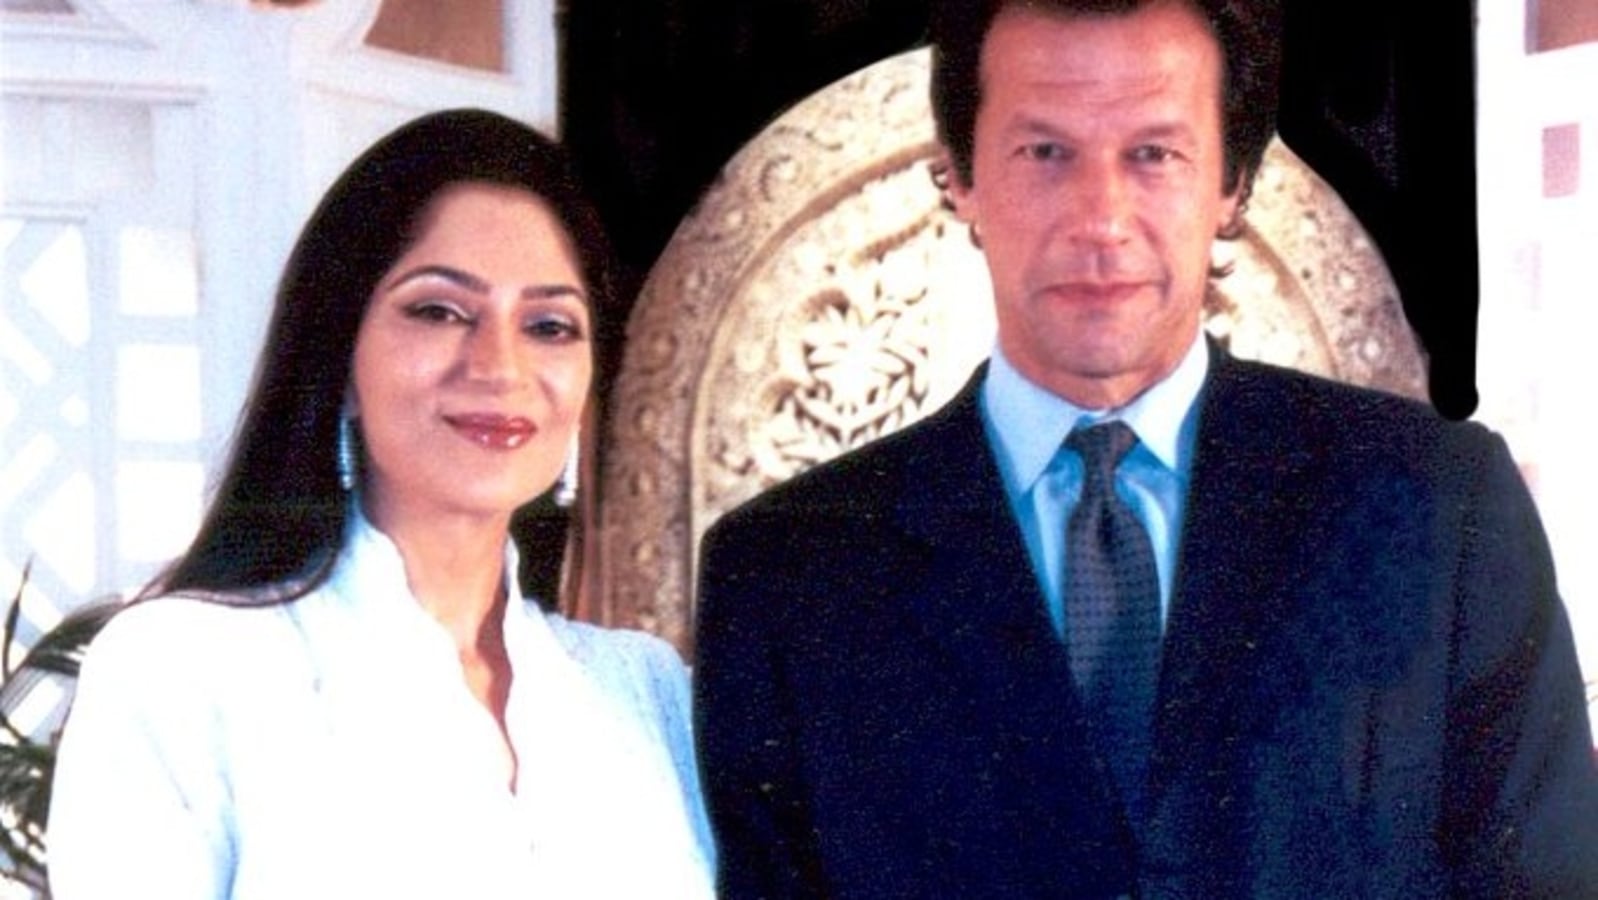 Bollywood star Simi Grewal stands in support of Imran Khan, 'He may have failings but isn't corrupt'